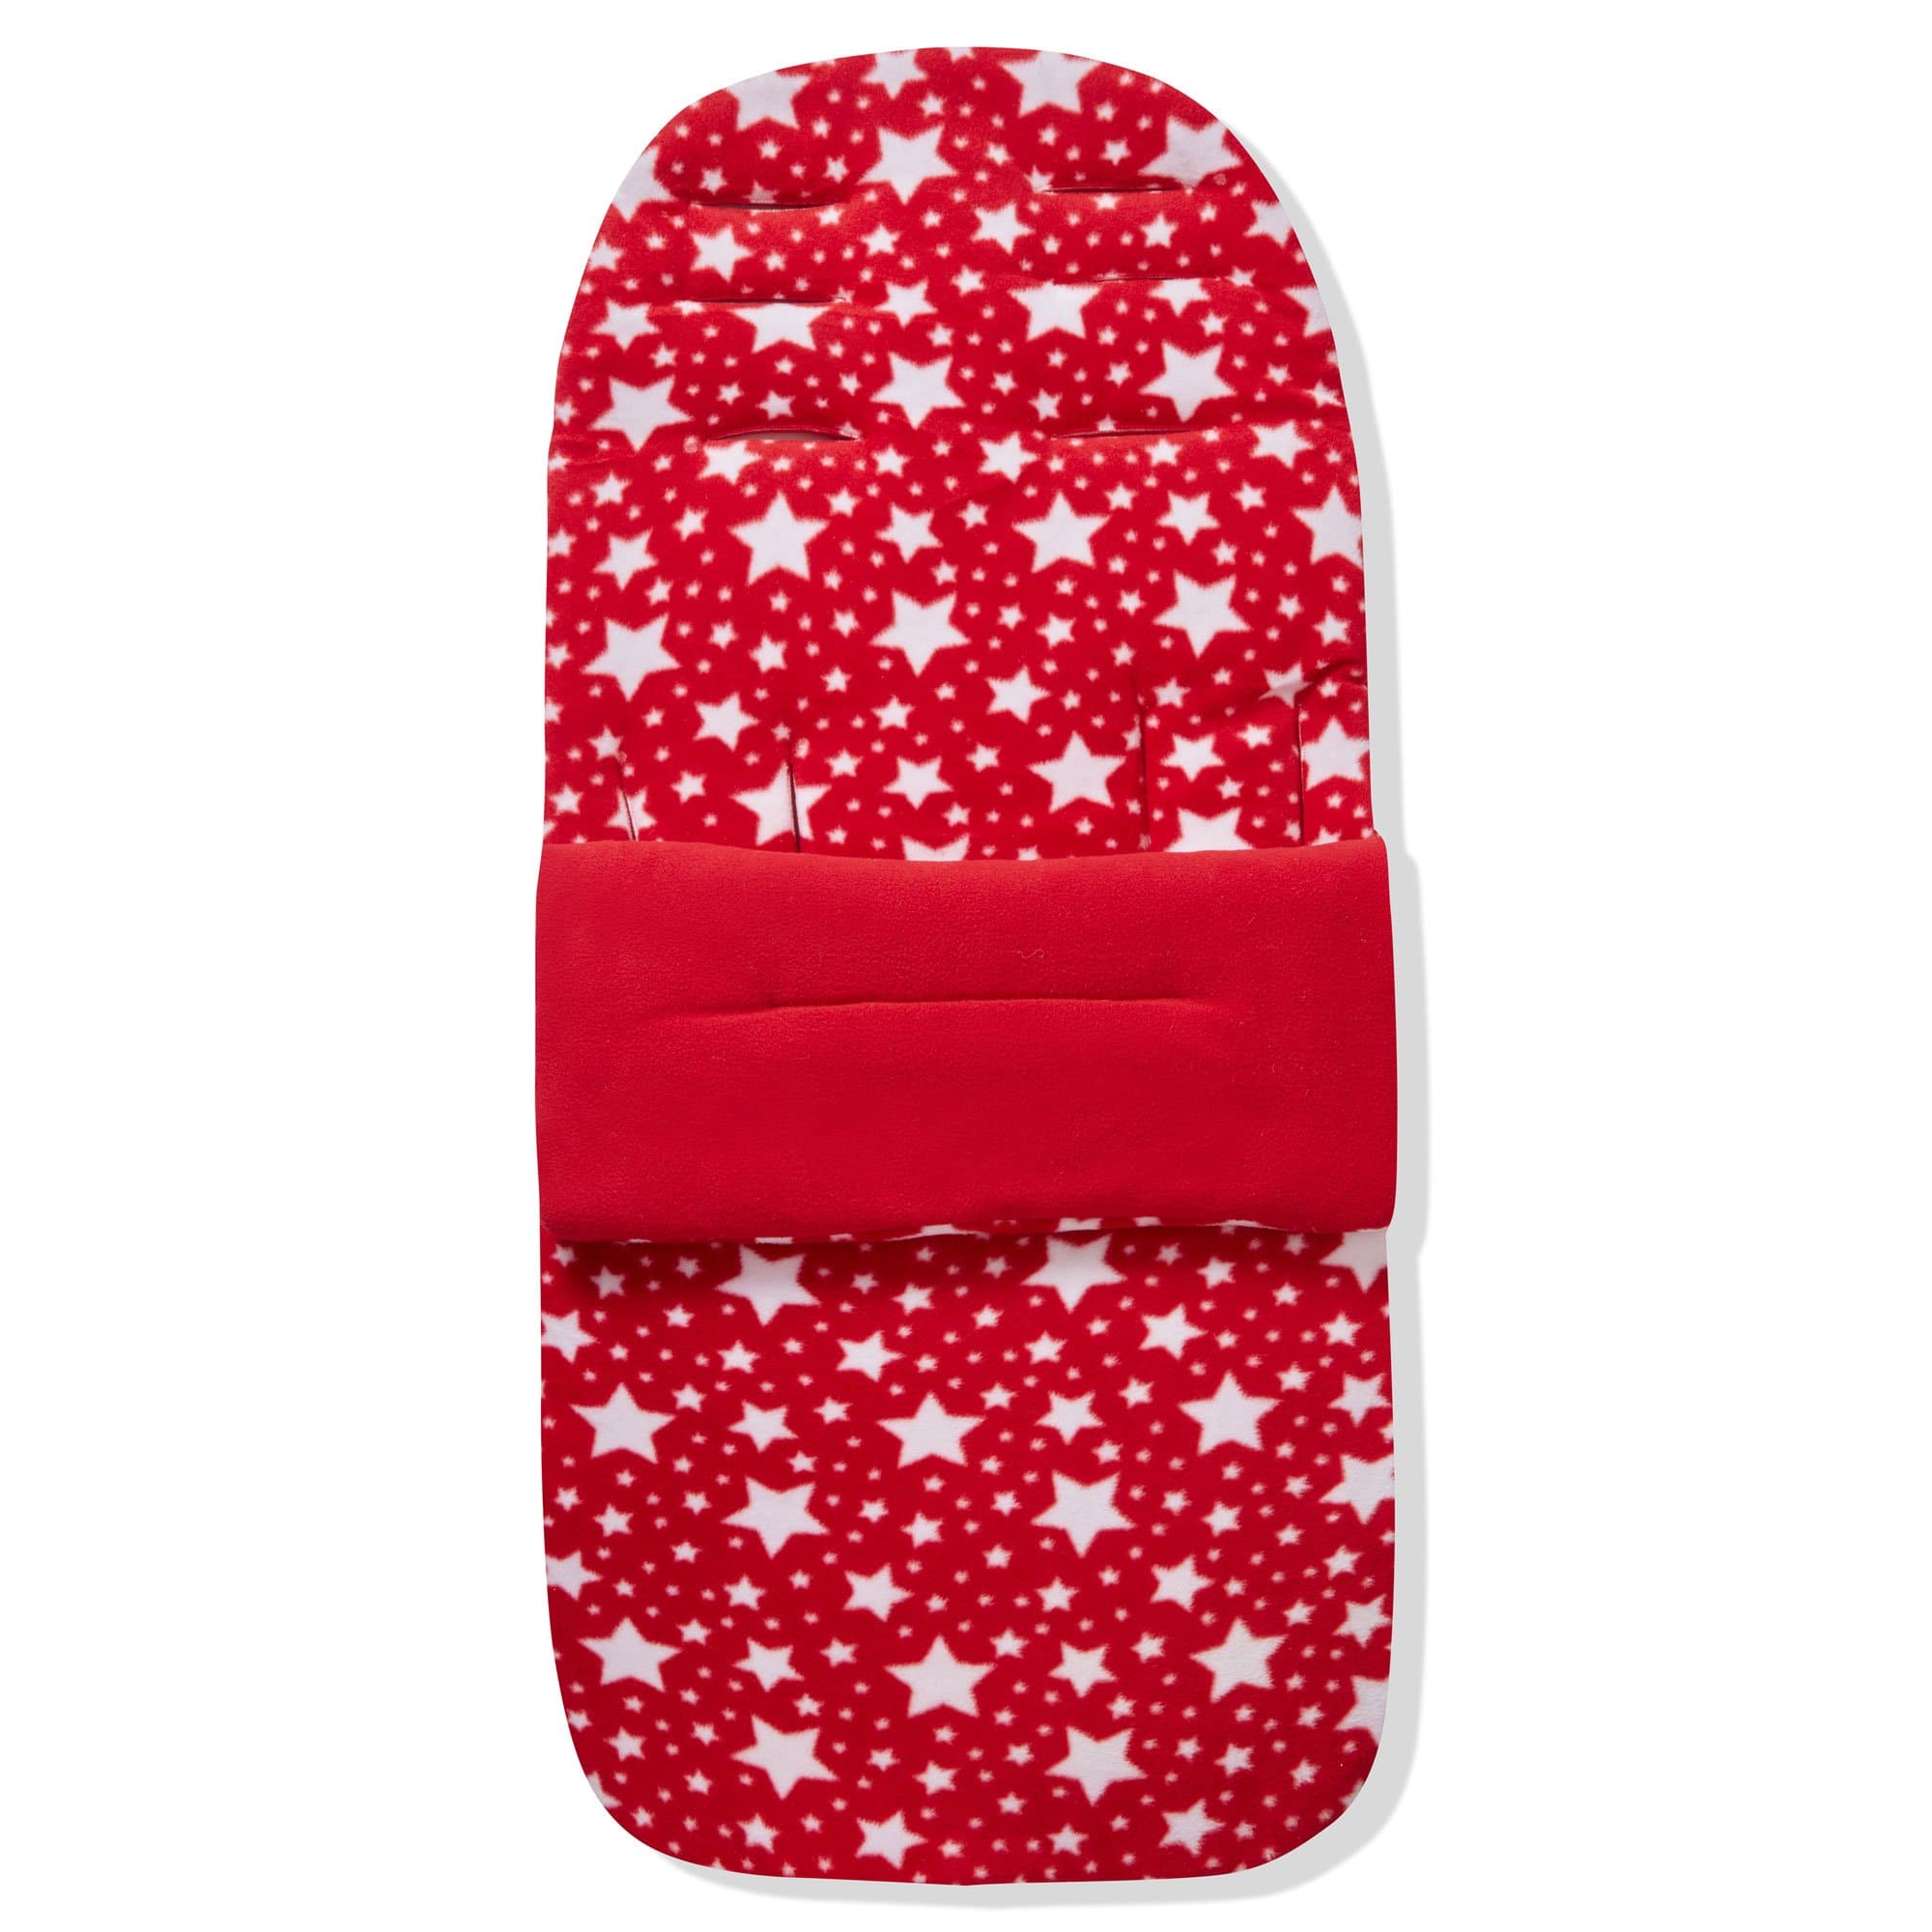 Fleece Footmuff / Cosy Toes Compatible with Hybrid - Red Star / Fits All Models | For Your Little One